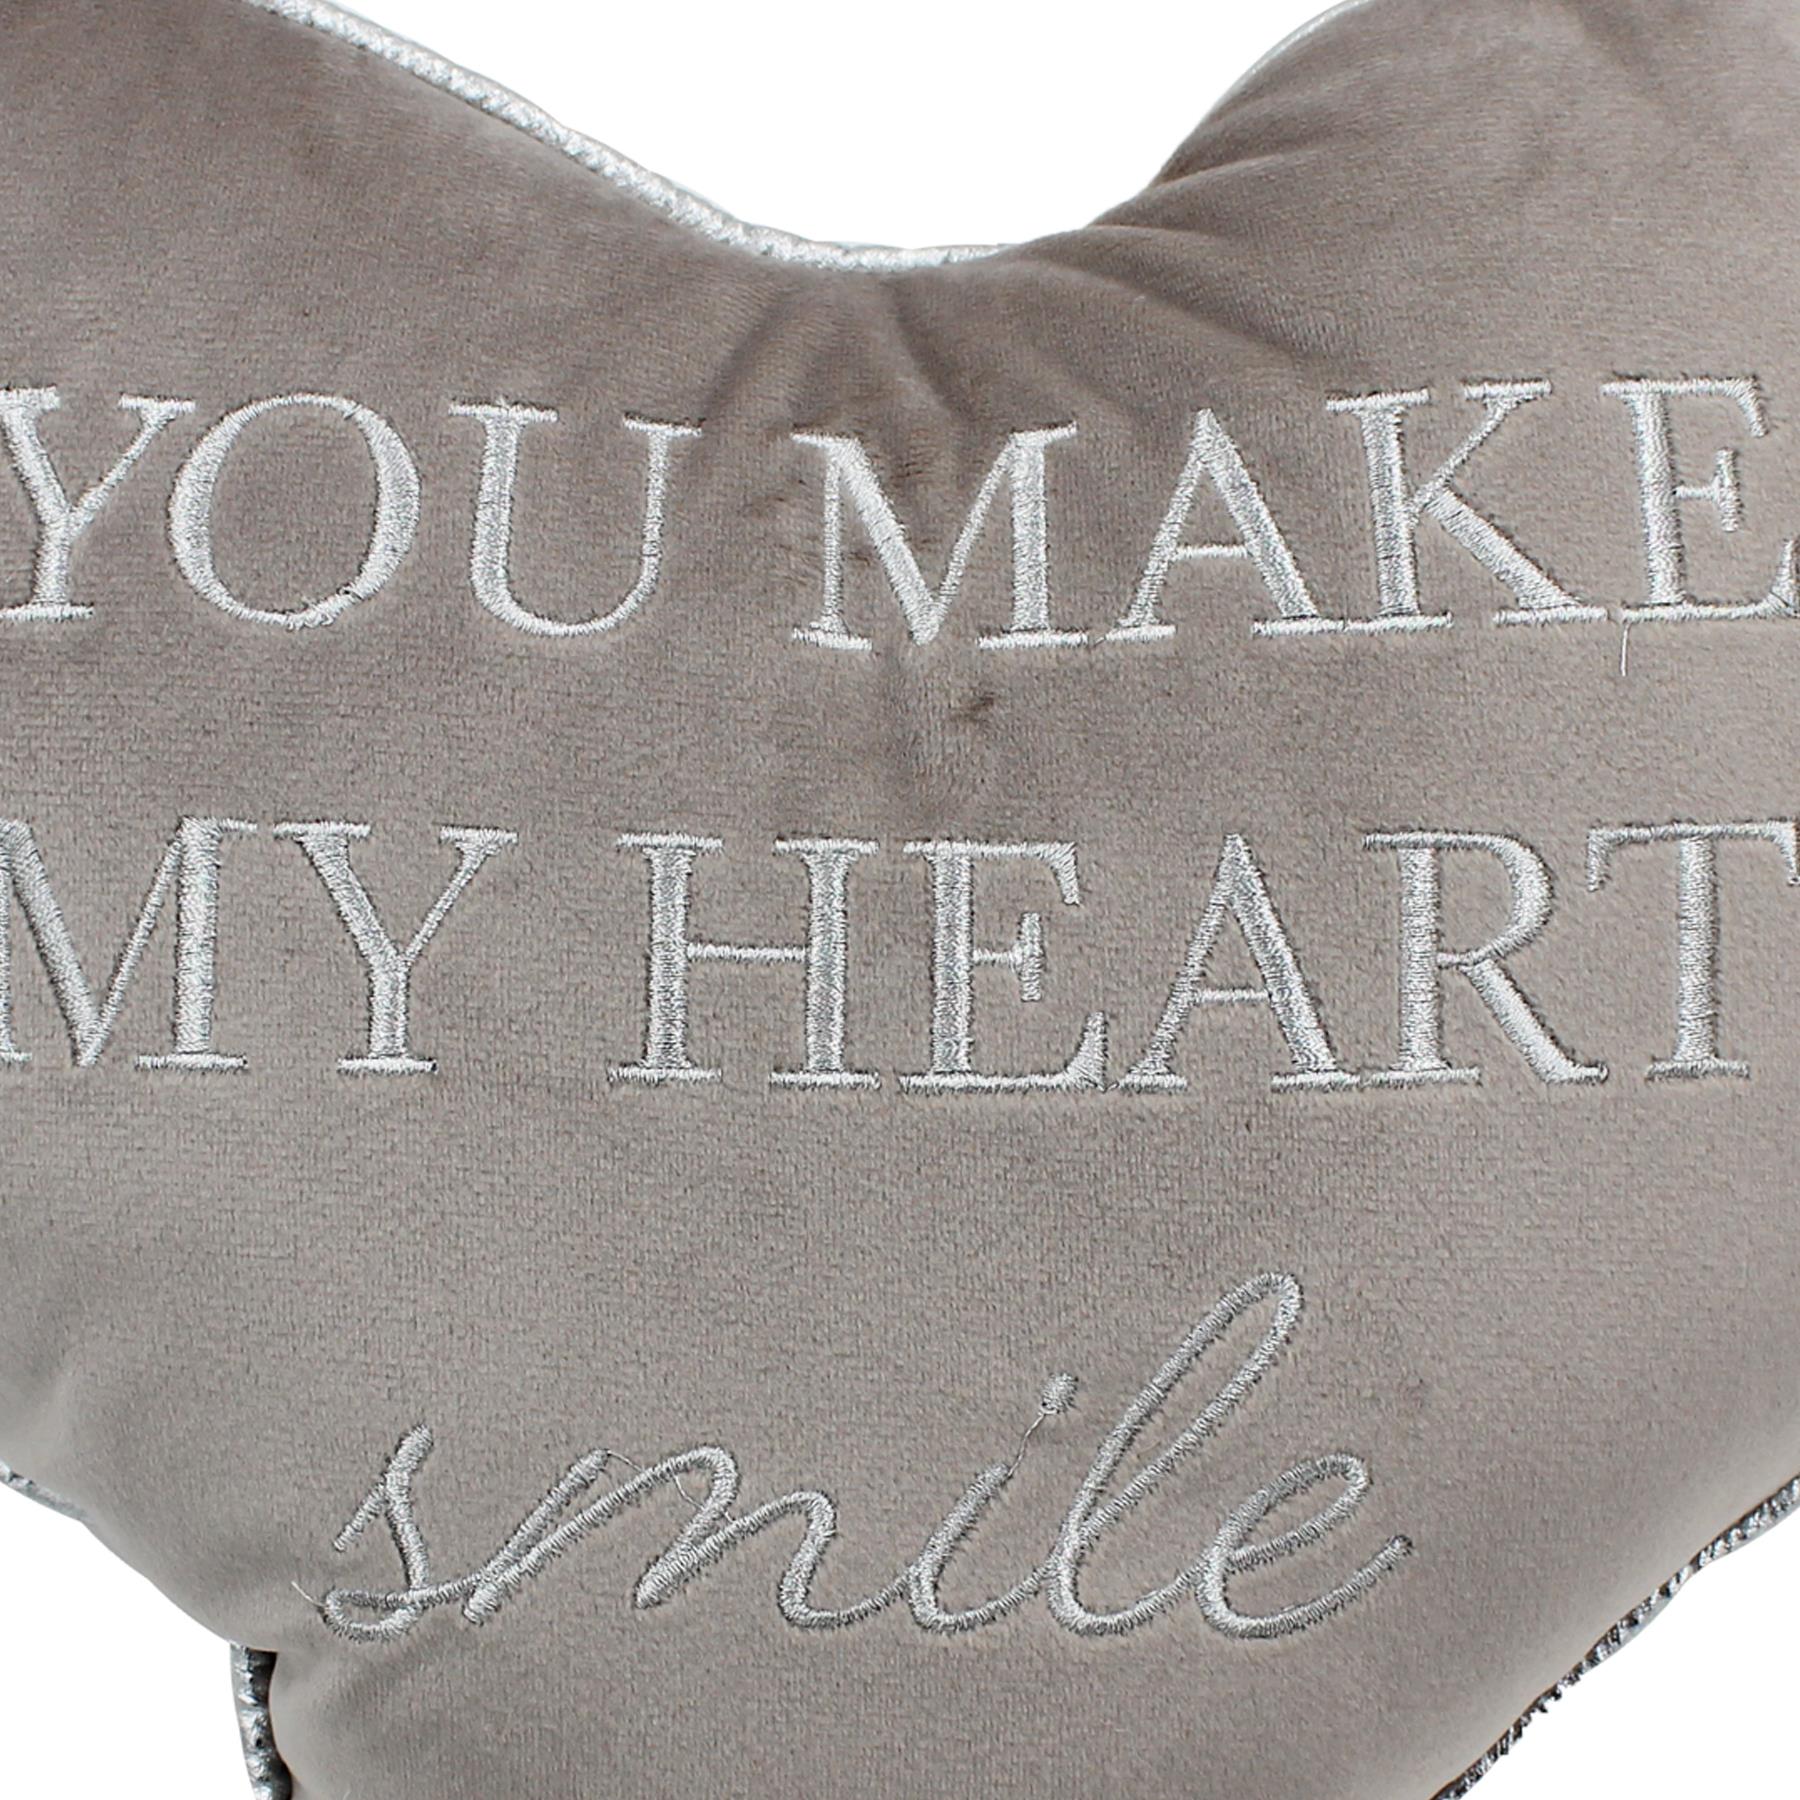 Heart Cushion Grey Velour with Wording 'You make my heart smile'